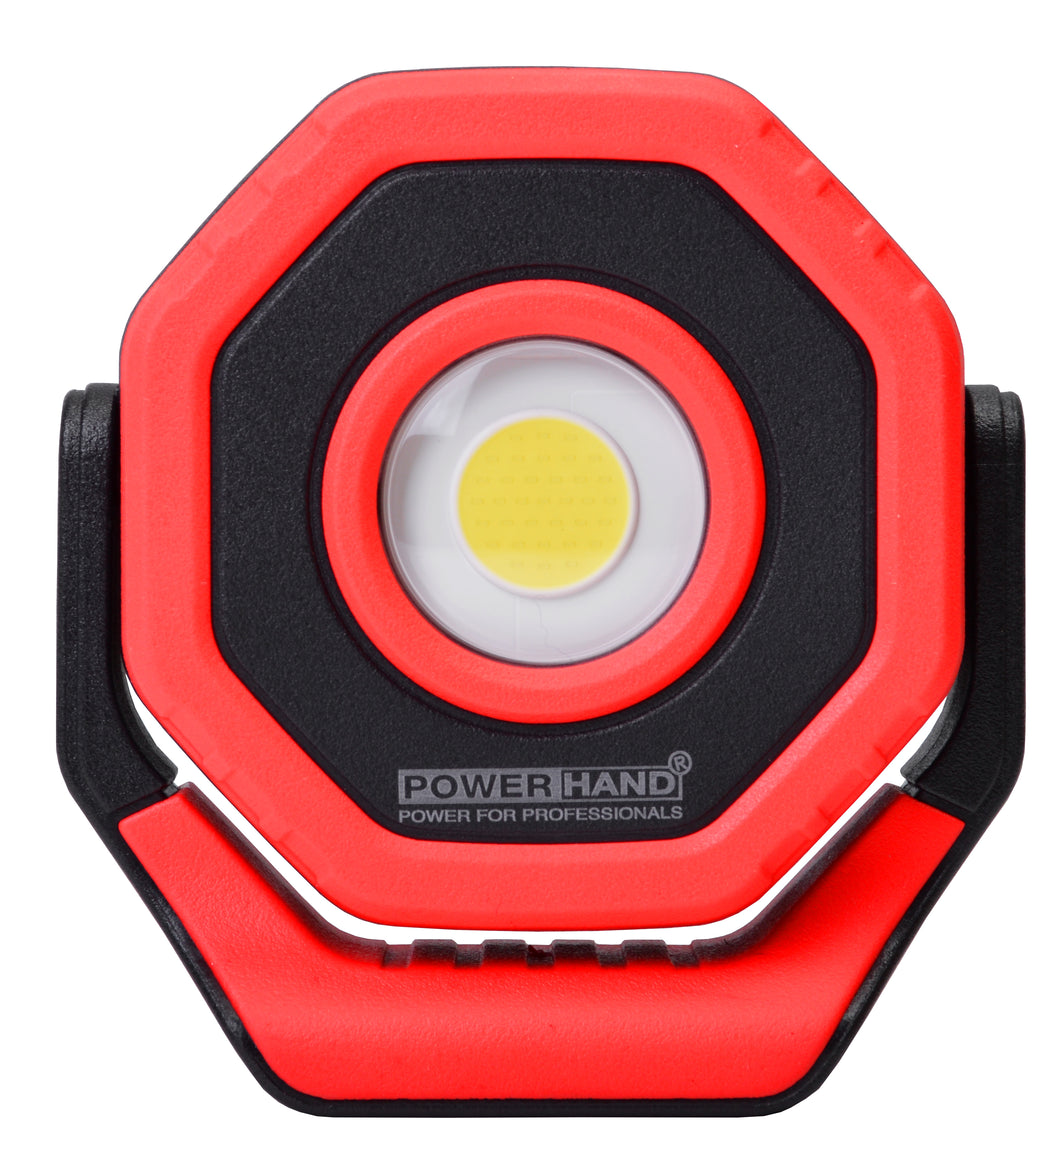 POWERHAND 700 Lumen Rechargeable Pocket Flood Light - Available in Red or Green